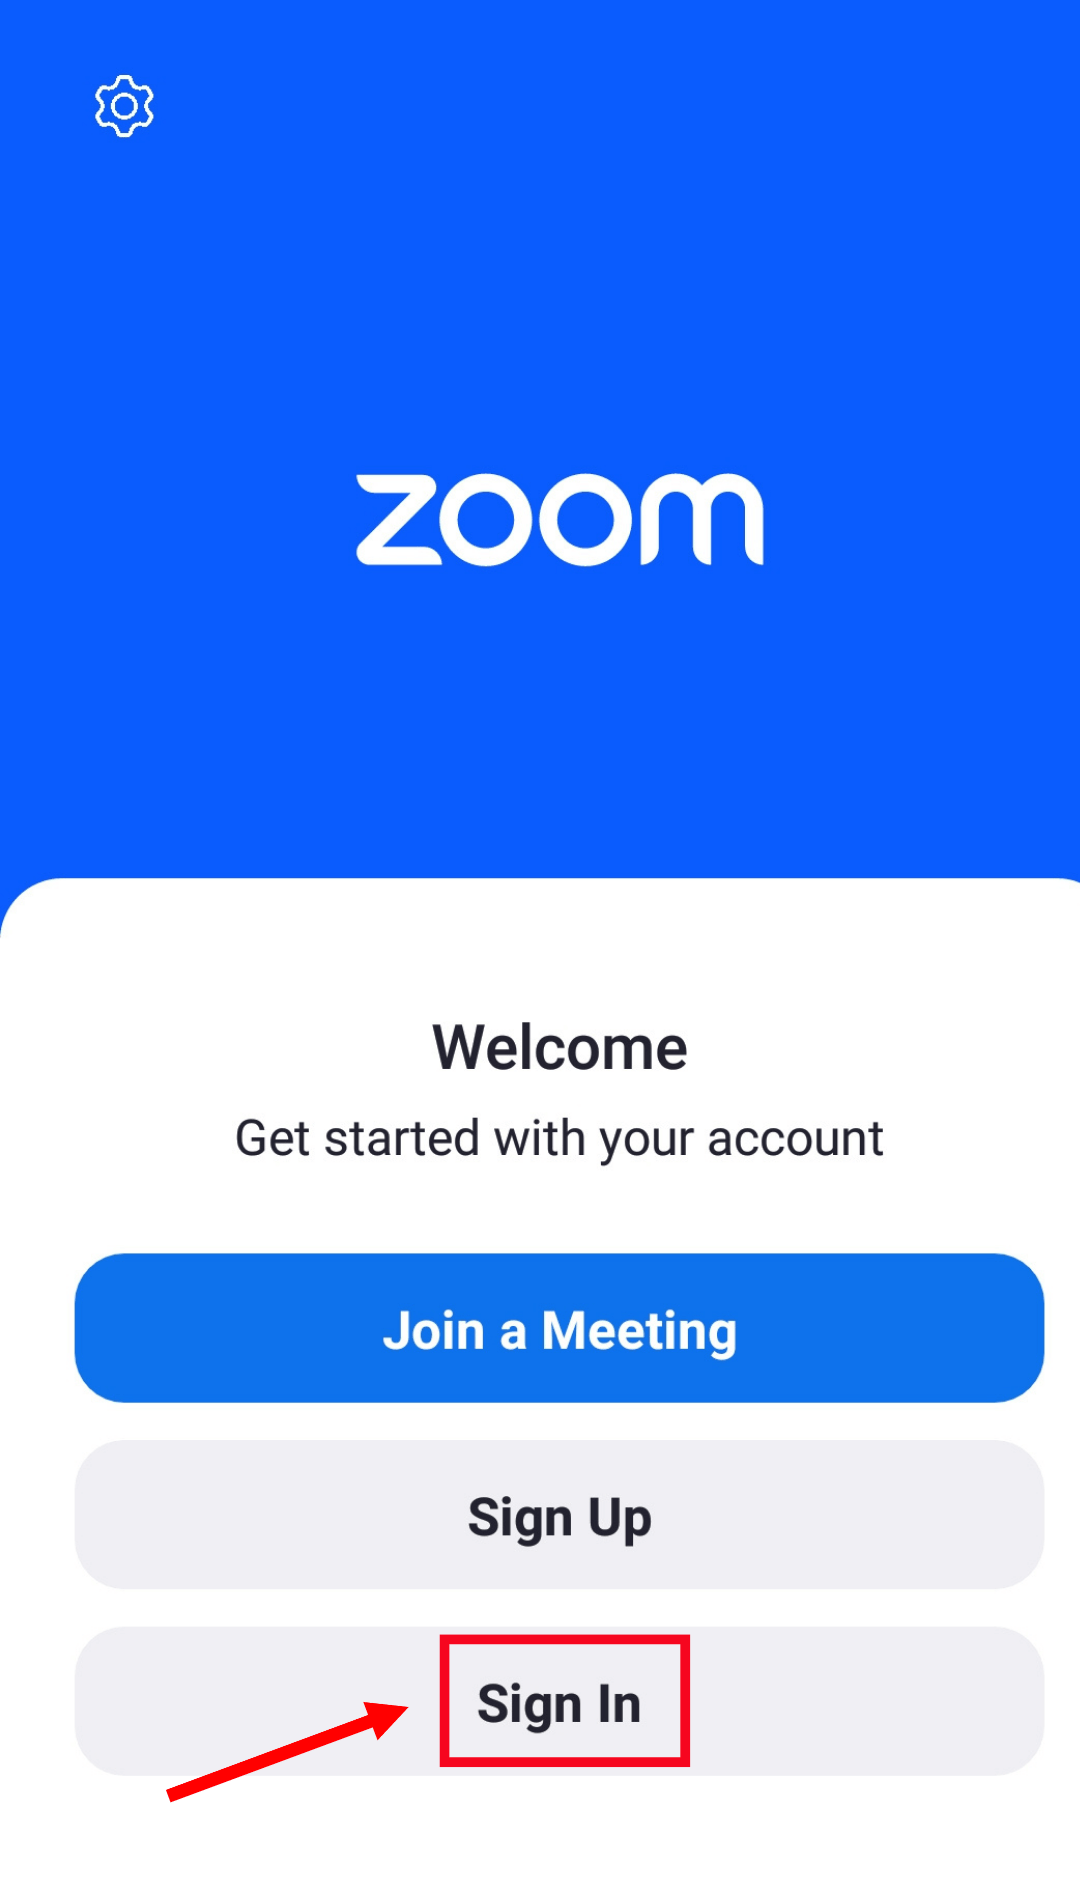 download Zoom mobile app and sign in